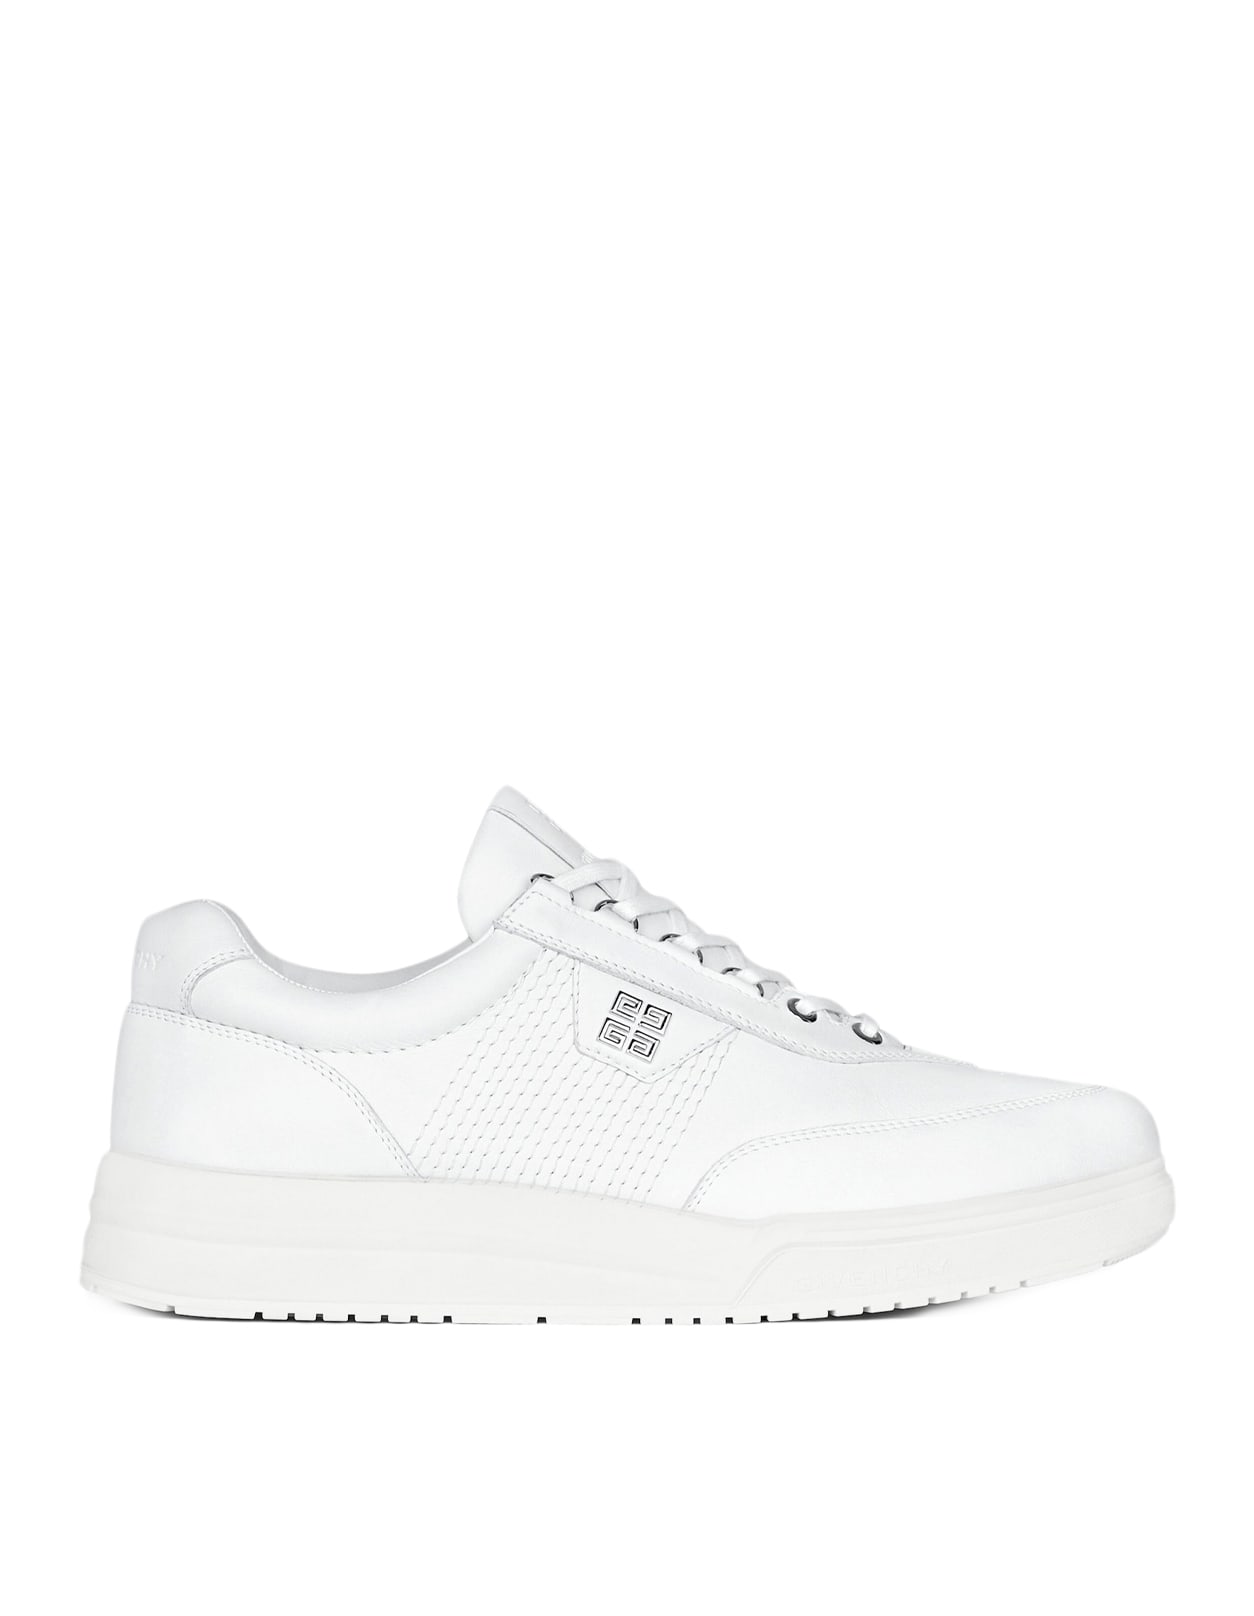 GIVENCHY MAN G4 SNEAKERS IN WHITE LEATHER